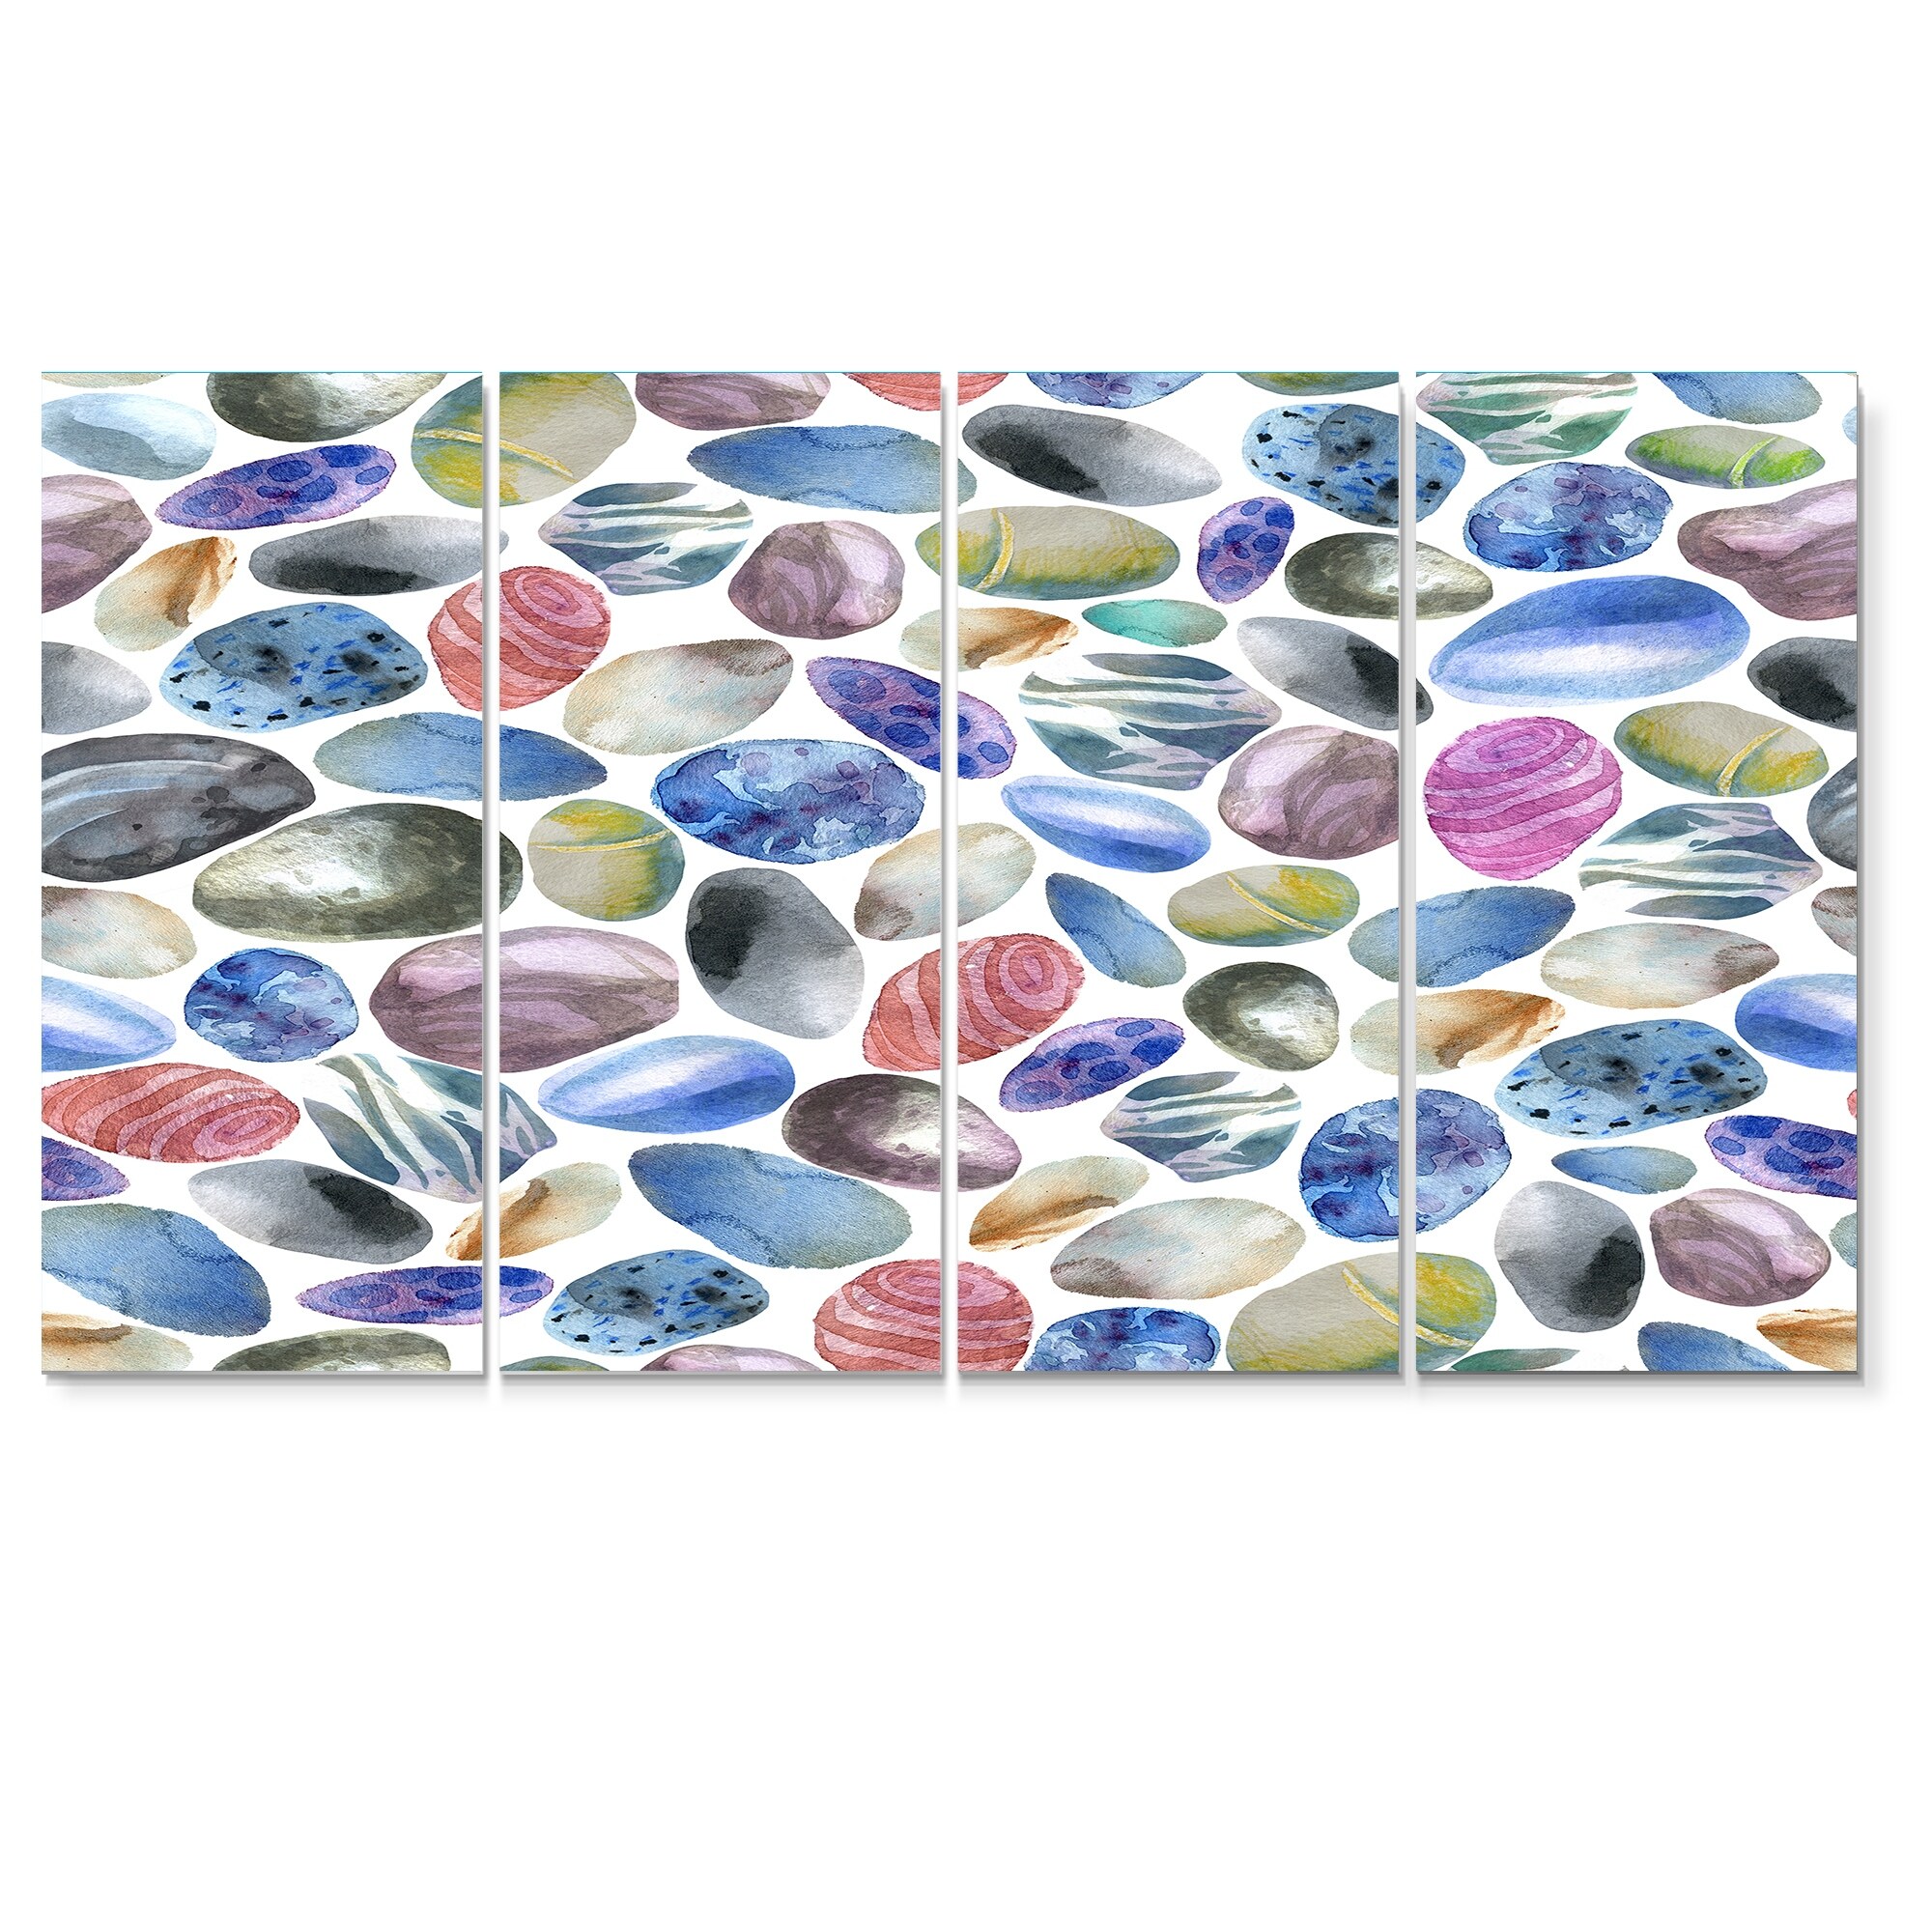 Designart "Colourful Sea Stones In Blue And Green" Patterned Canvas Wall Art Print - 60x32 - 5 Panels